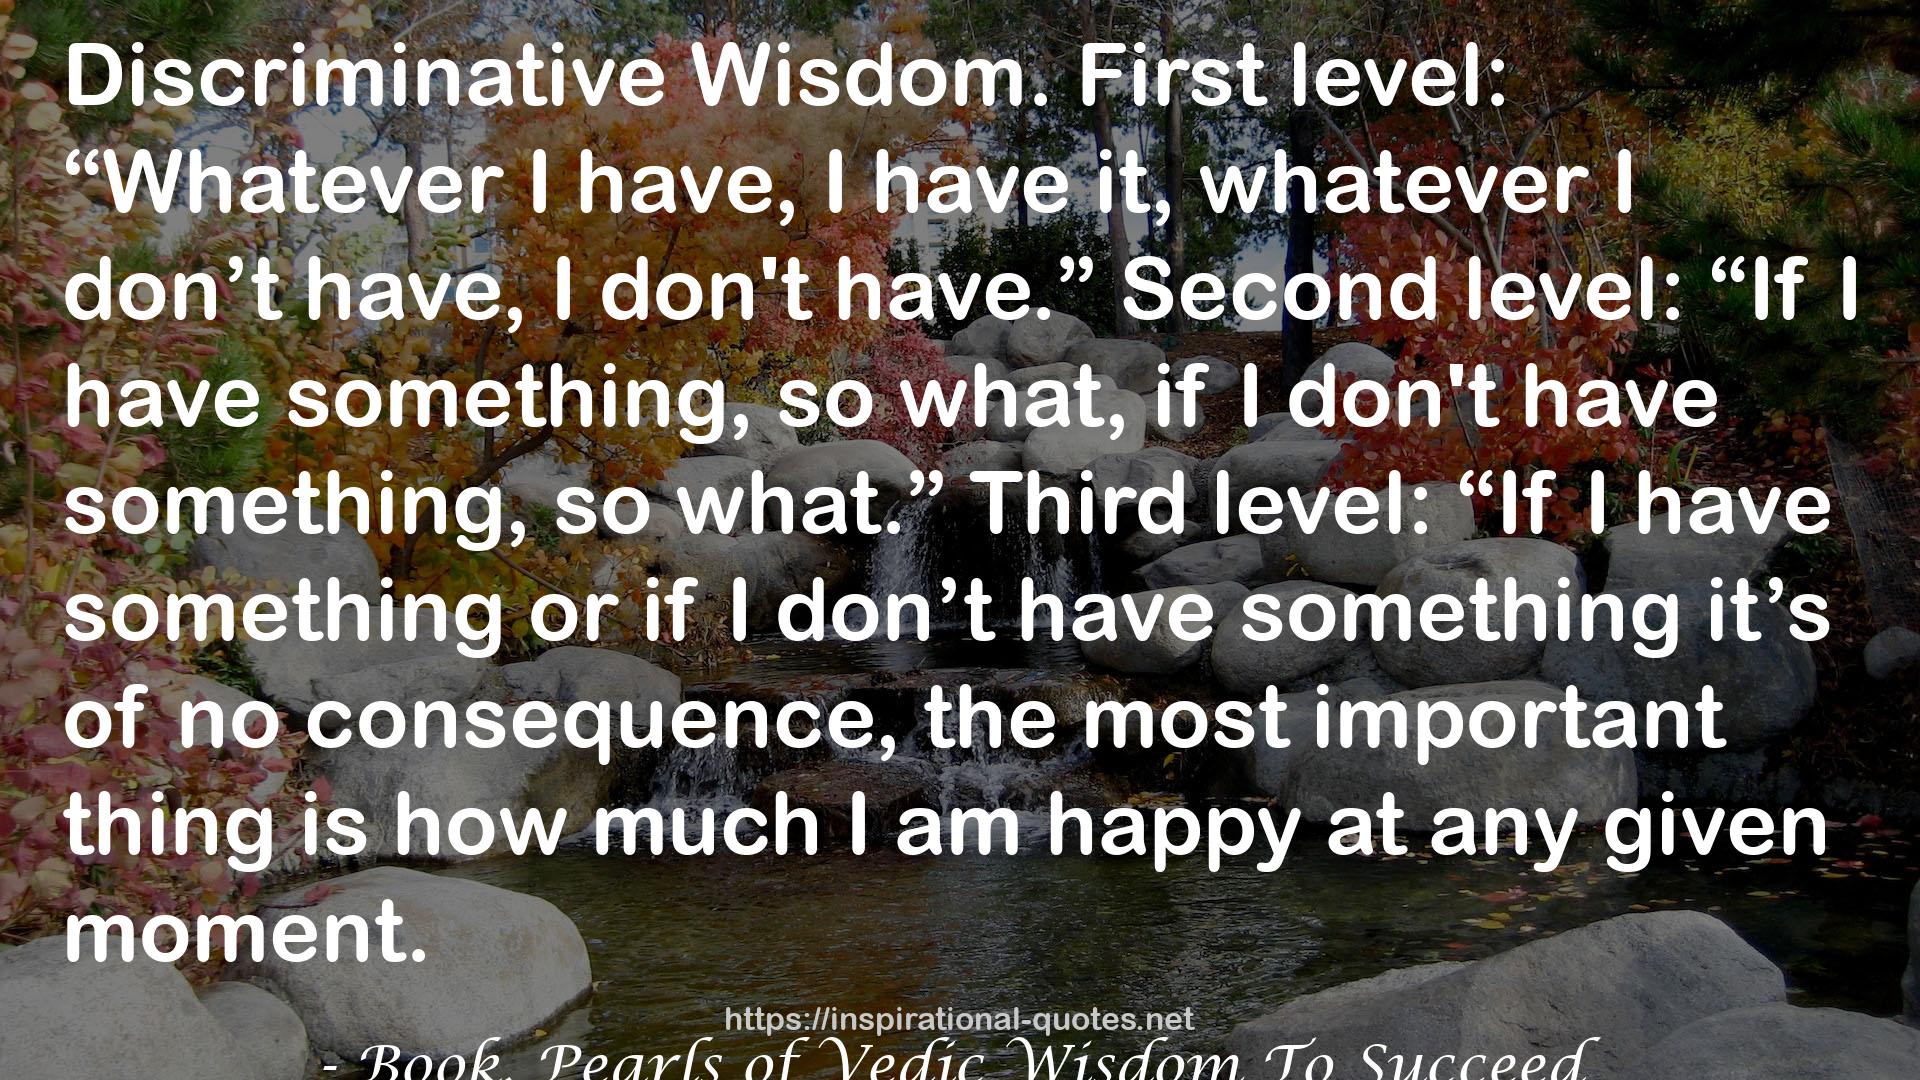 Book, Pearls of Vedic Wisdom To Succeed QUOTES